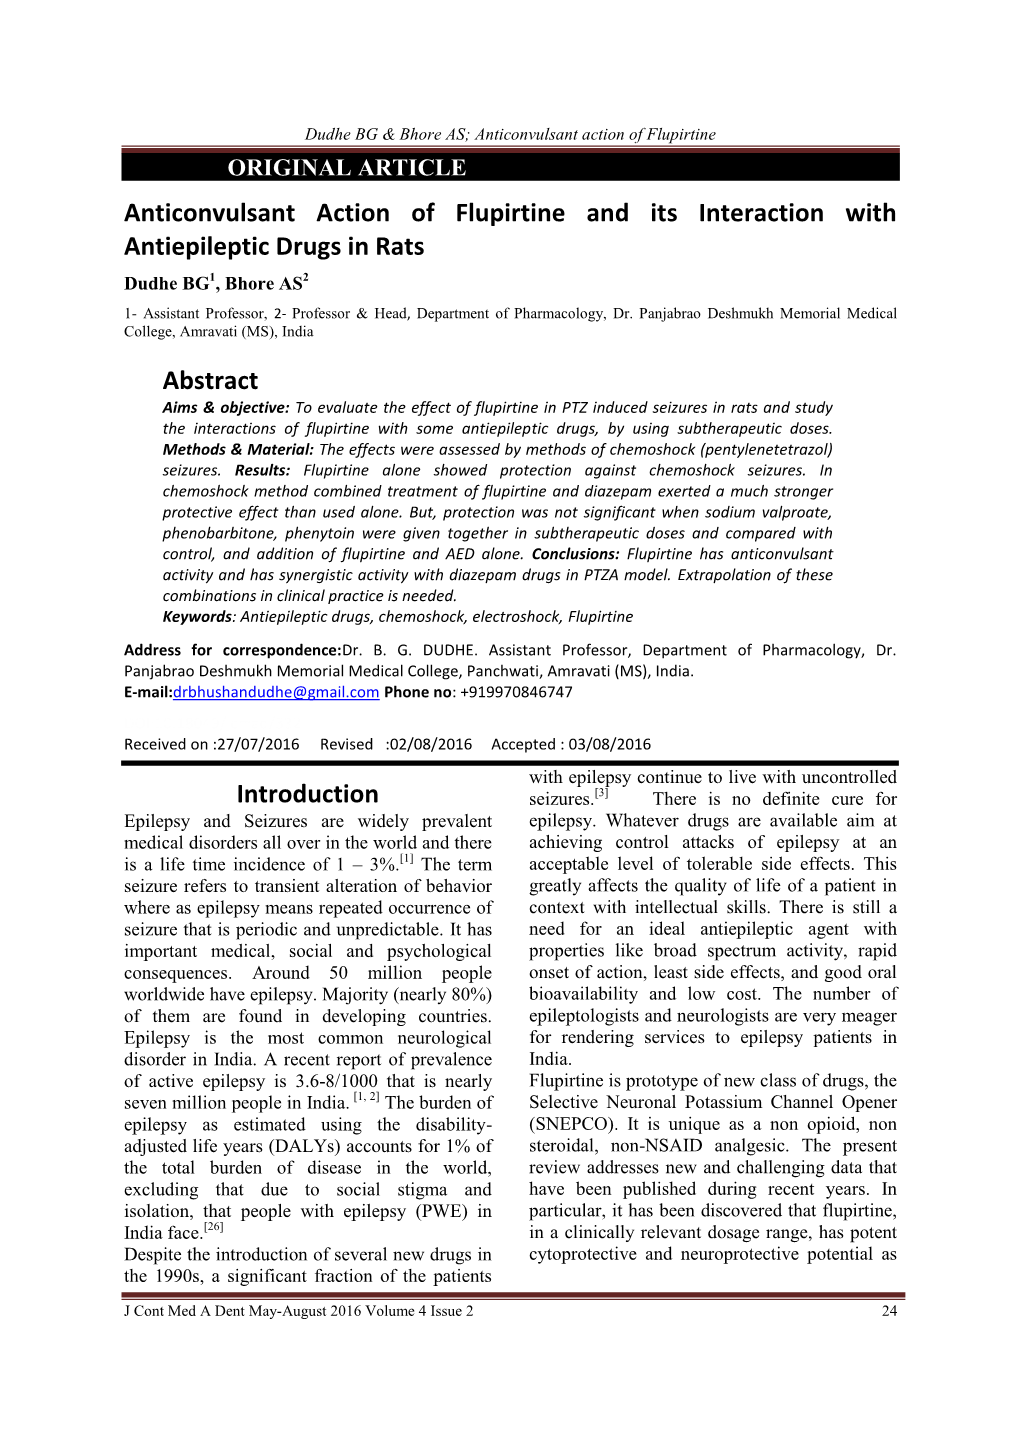 Anticonvulsant Action of Flupirtine and Its Interaction with Antiepileptic Drugs in Rats